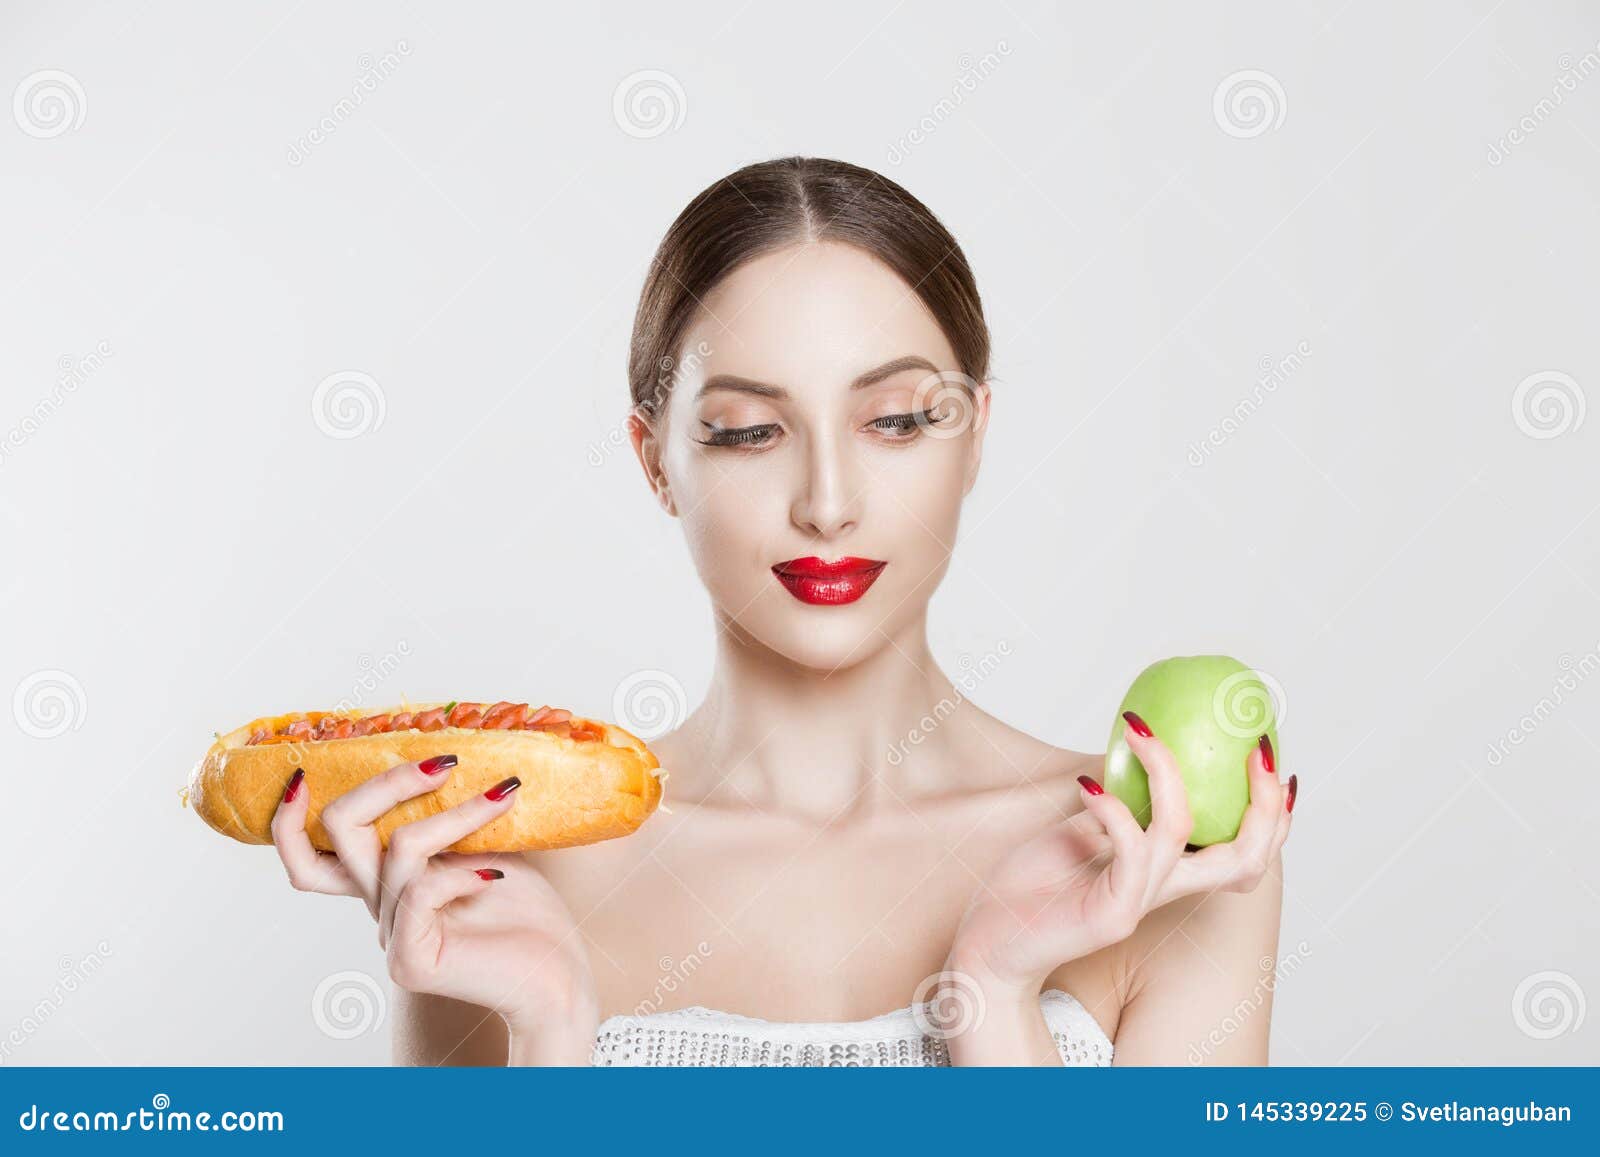 Woman Compare Tasty Unhealthy Burger Sandwich Hotdog In Hand And Green ...